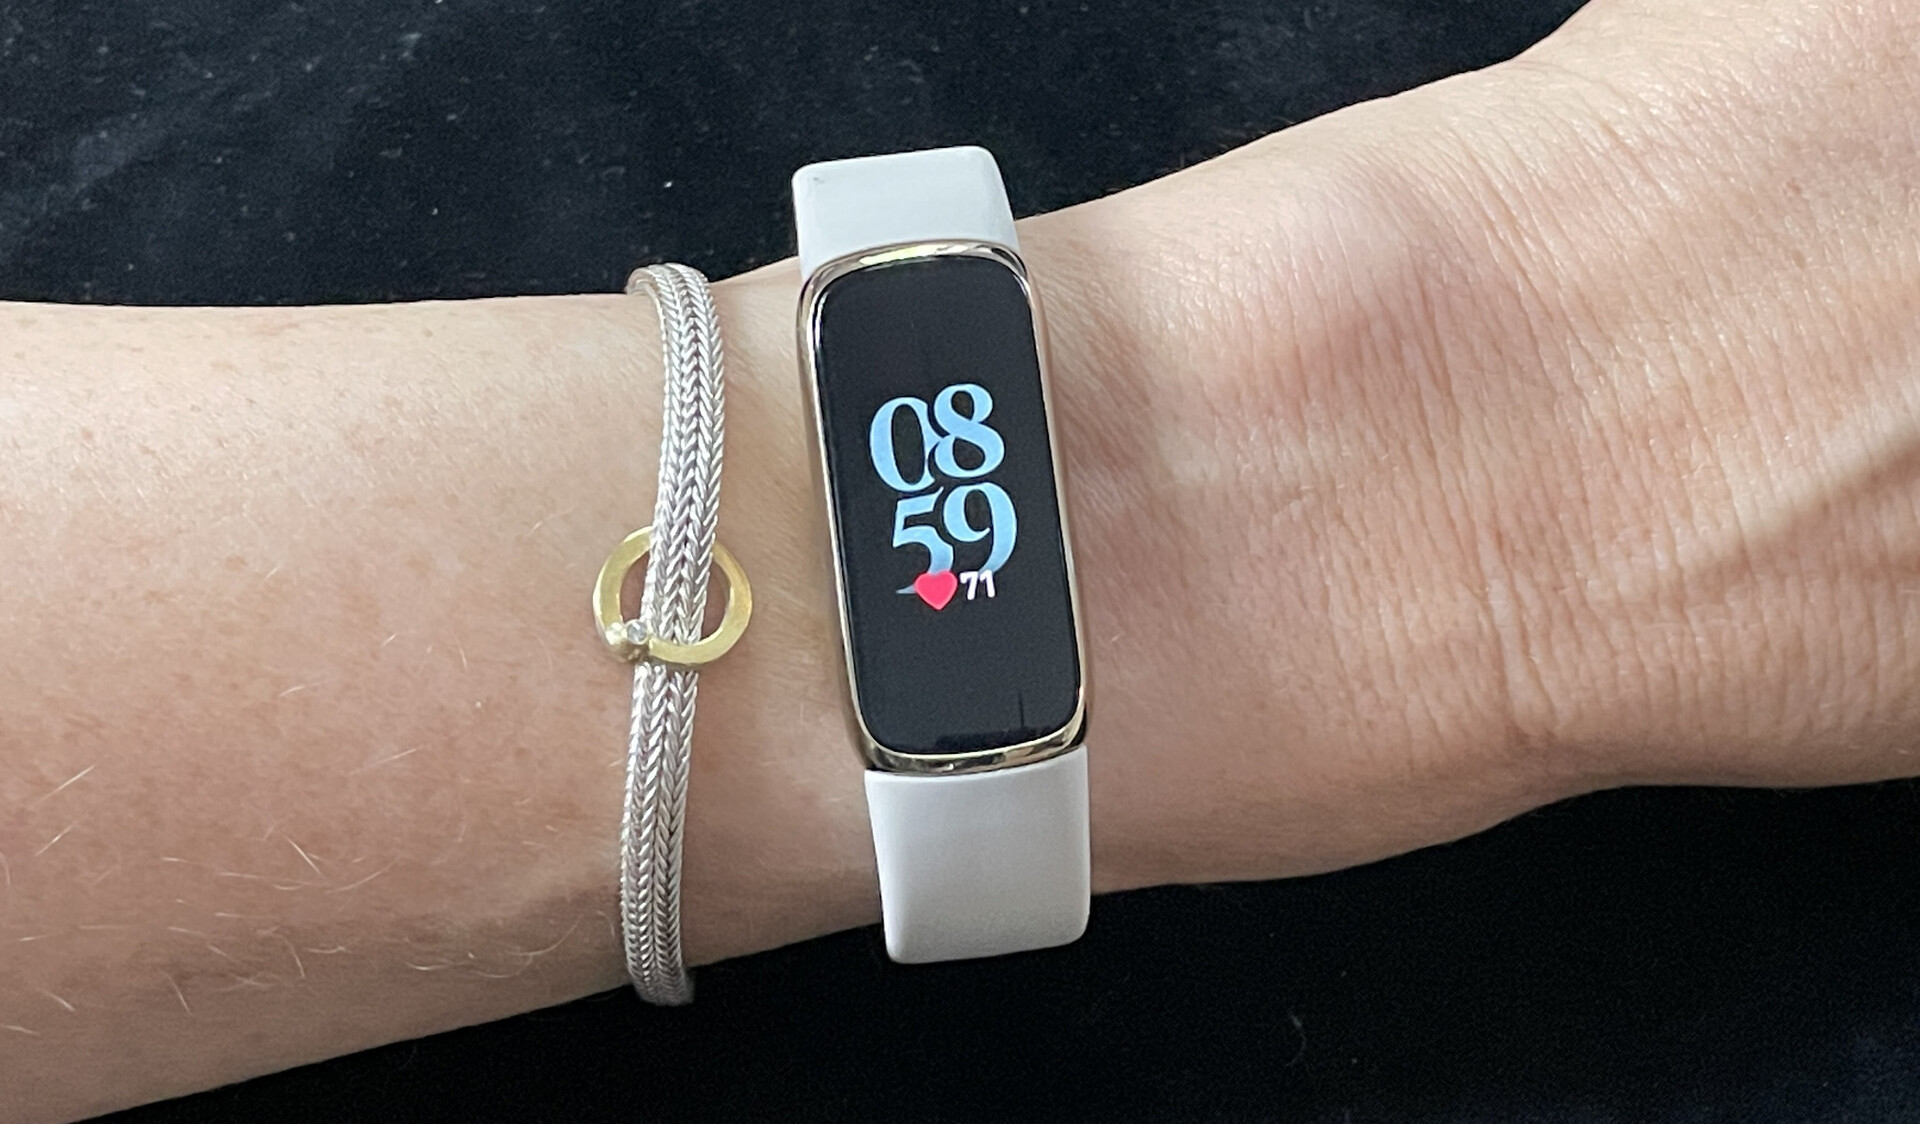 Fitbit Luxe Tracker Review: Pros and Cons of the Device